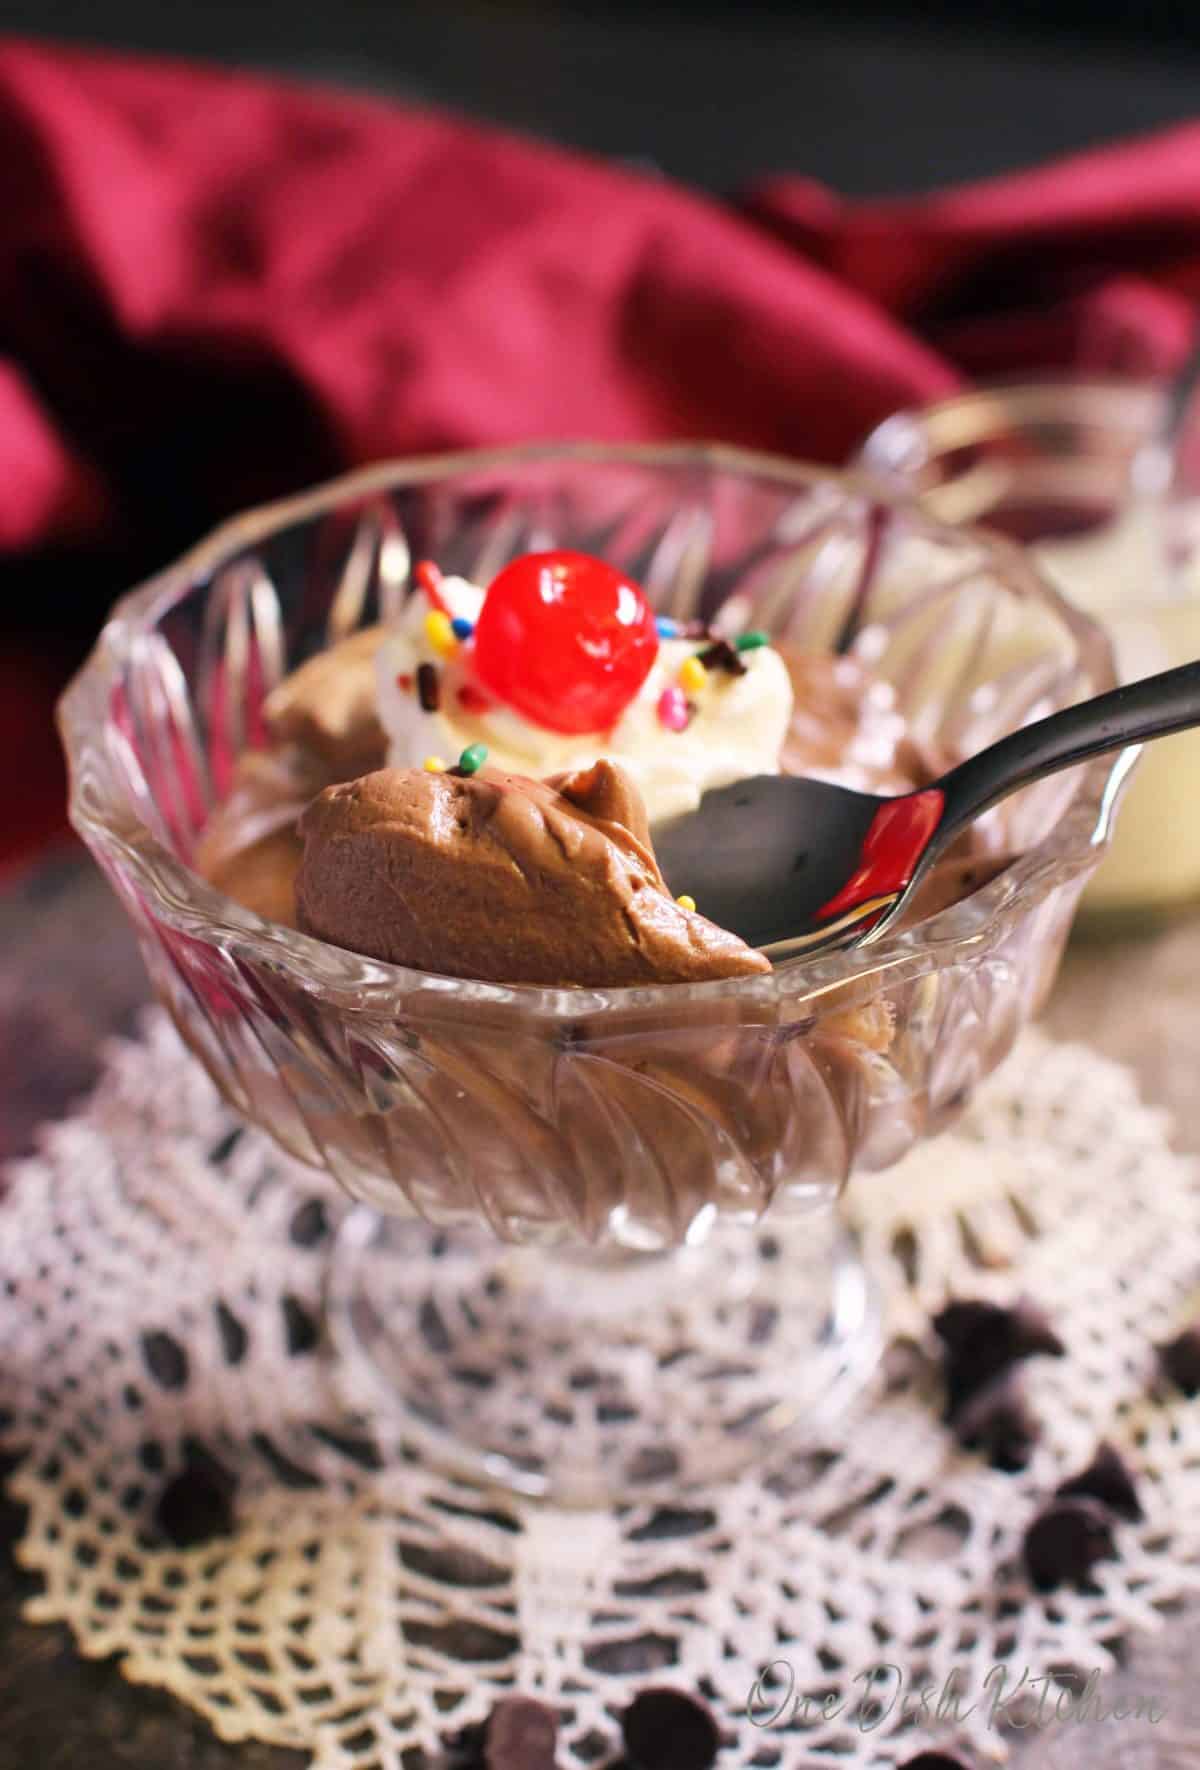 A spoonful of chocolate mousse being scooped out of a dessert glass topped with whipped cream, a cherry, and rainbow sprinkles on a metal tray with scattered chocolate chips, a small jar of whipped cream, and a red cloth napkin